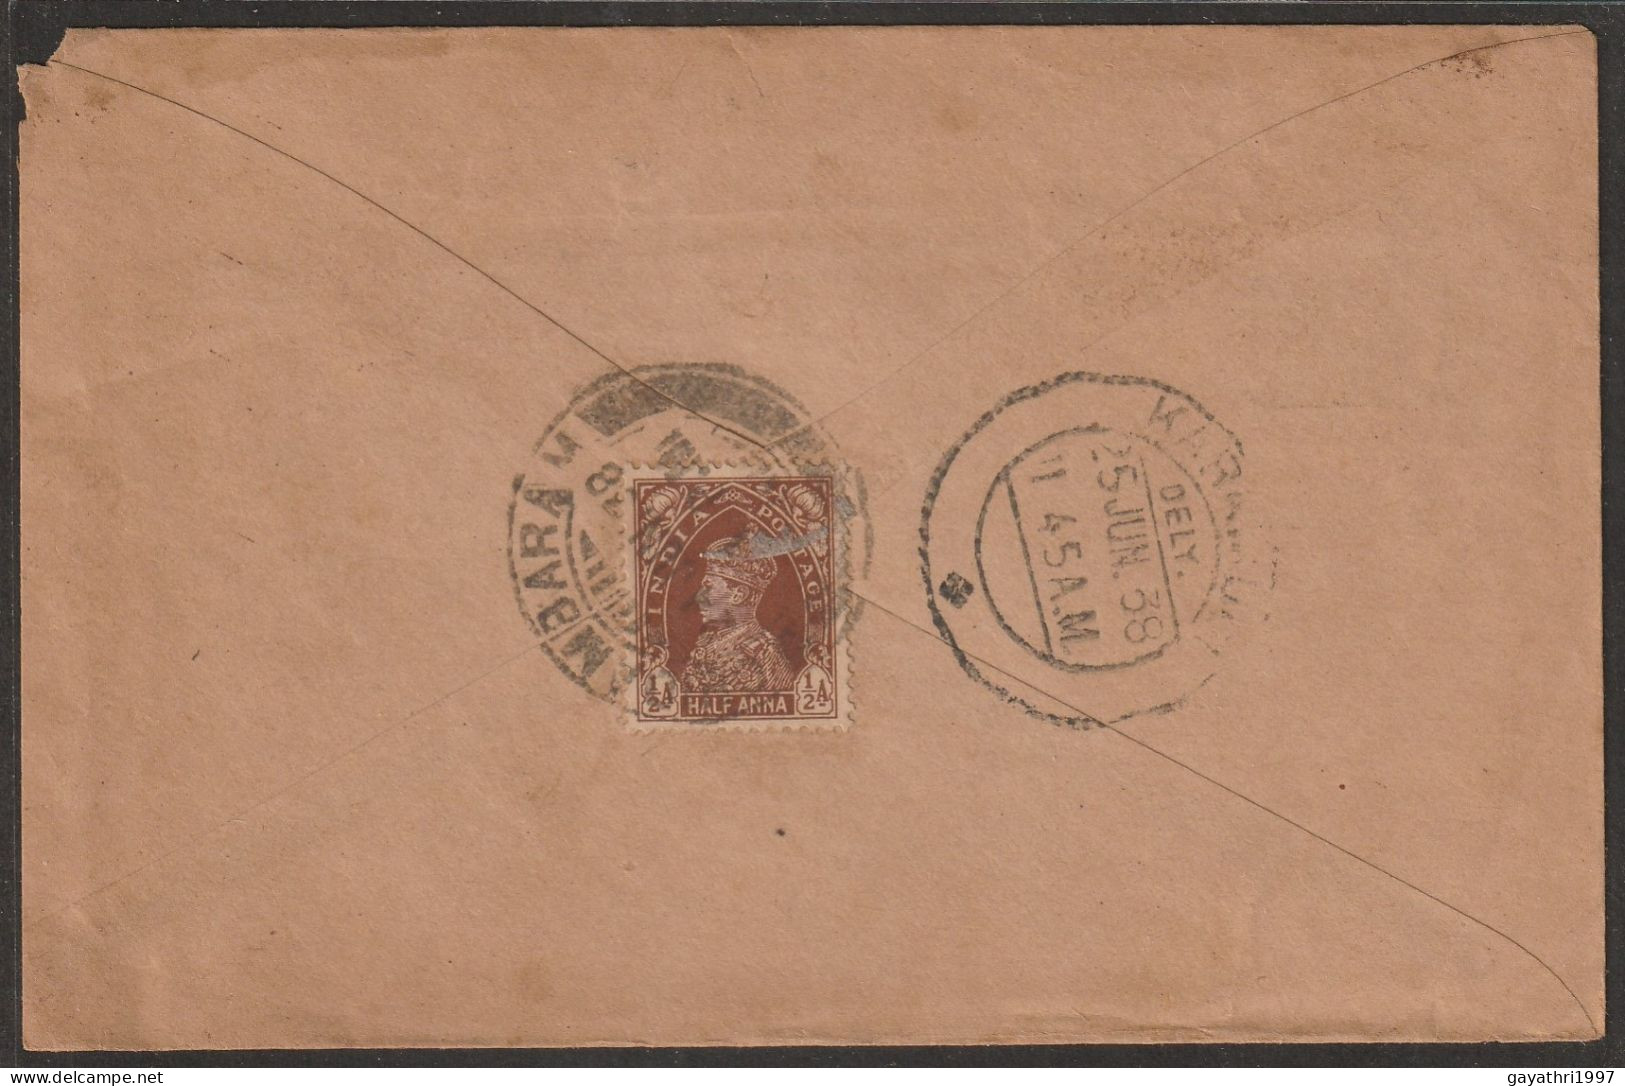 India 1938  K G VI Stamp On Cover From Chidambaram With Printed Hindu God (a71) - Hinduismus